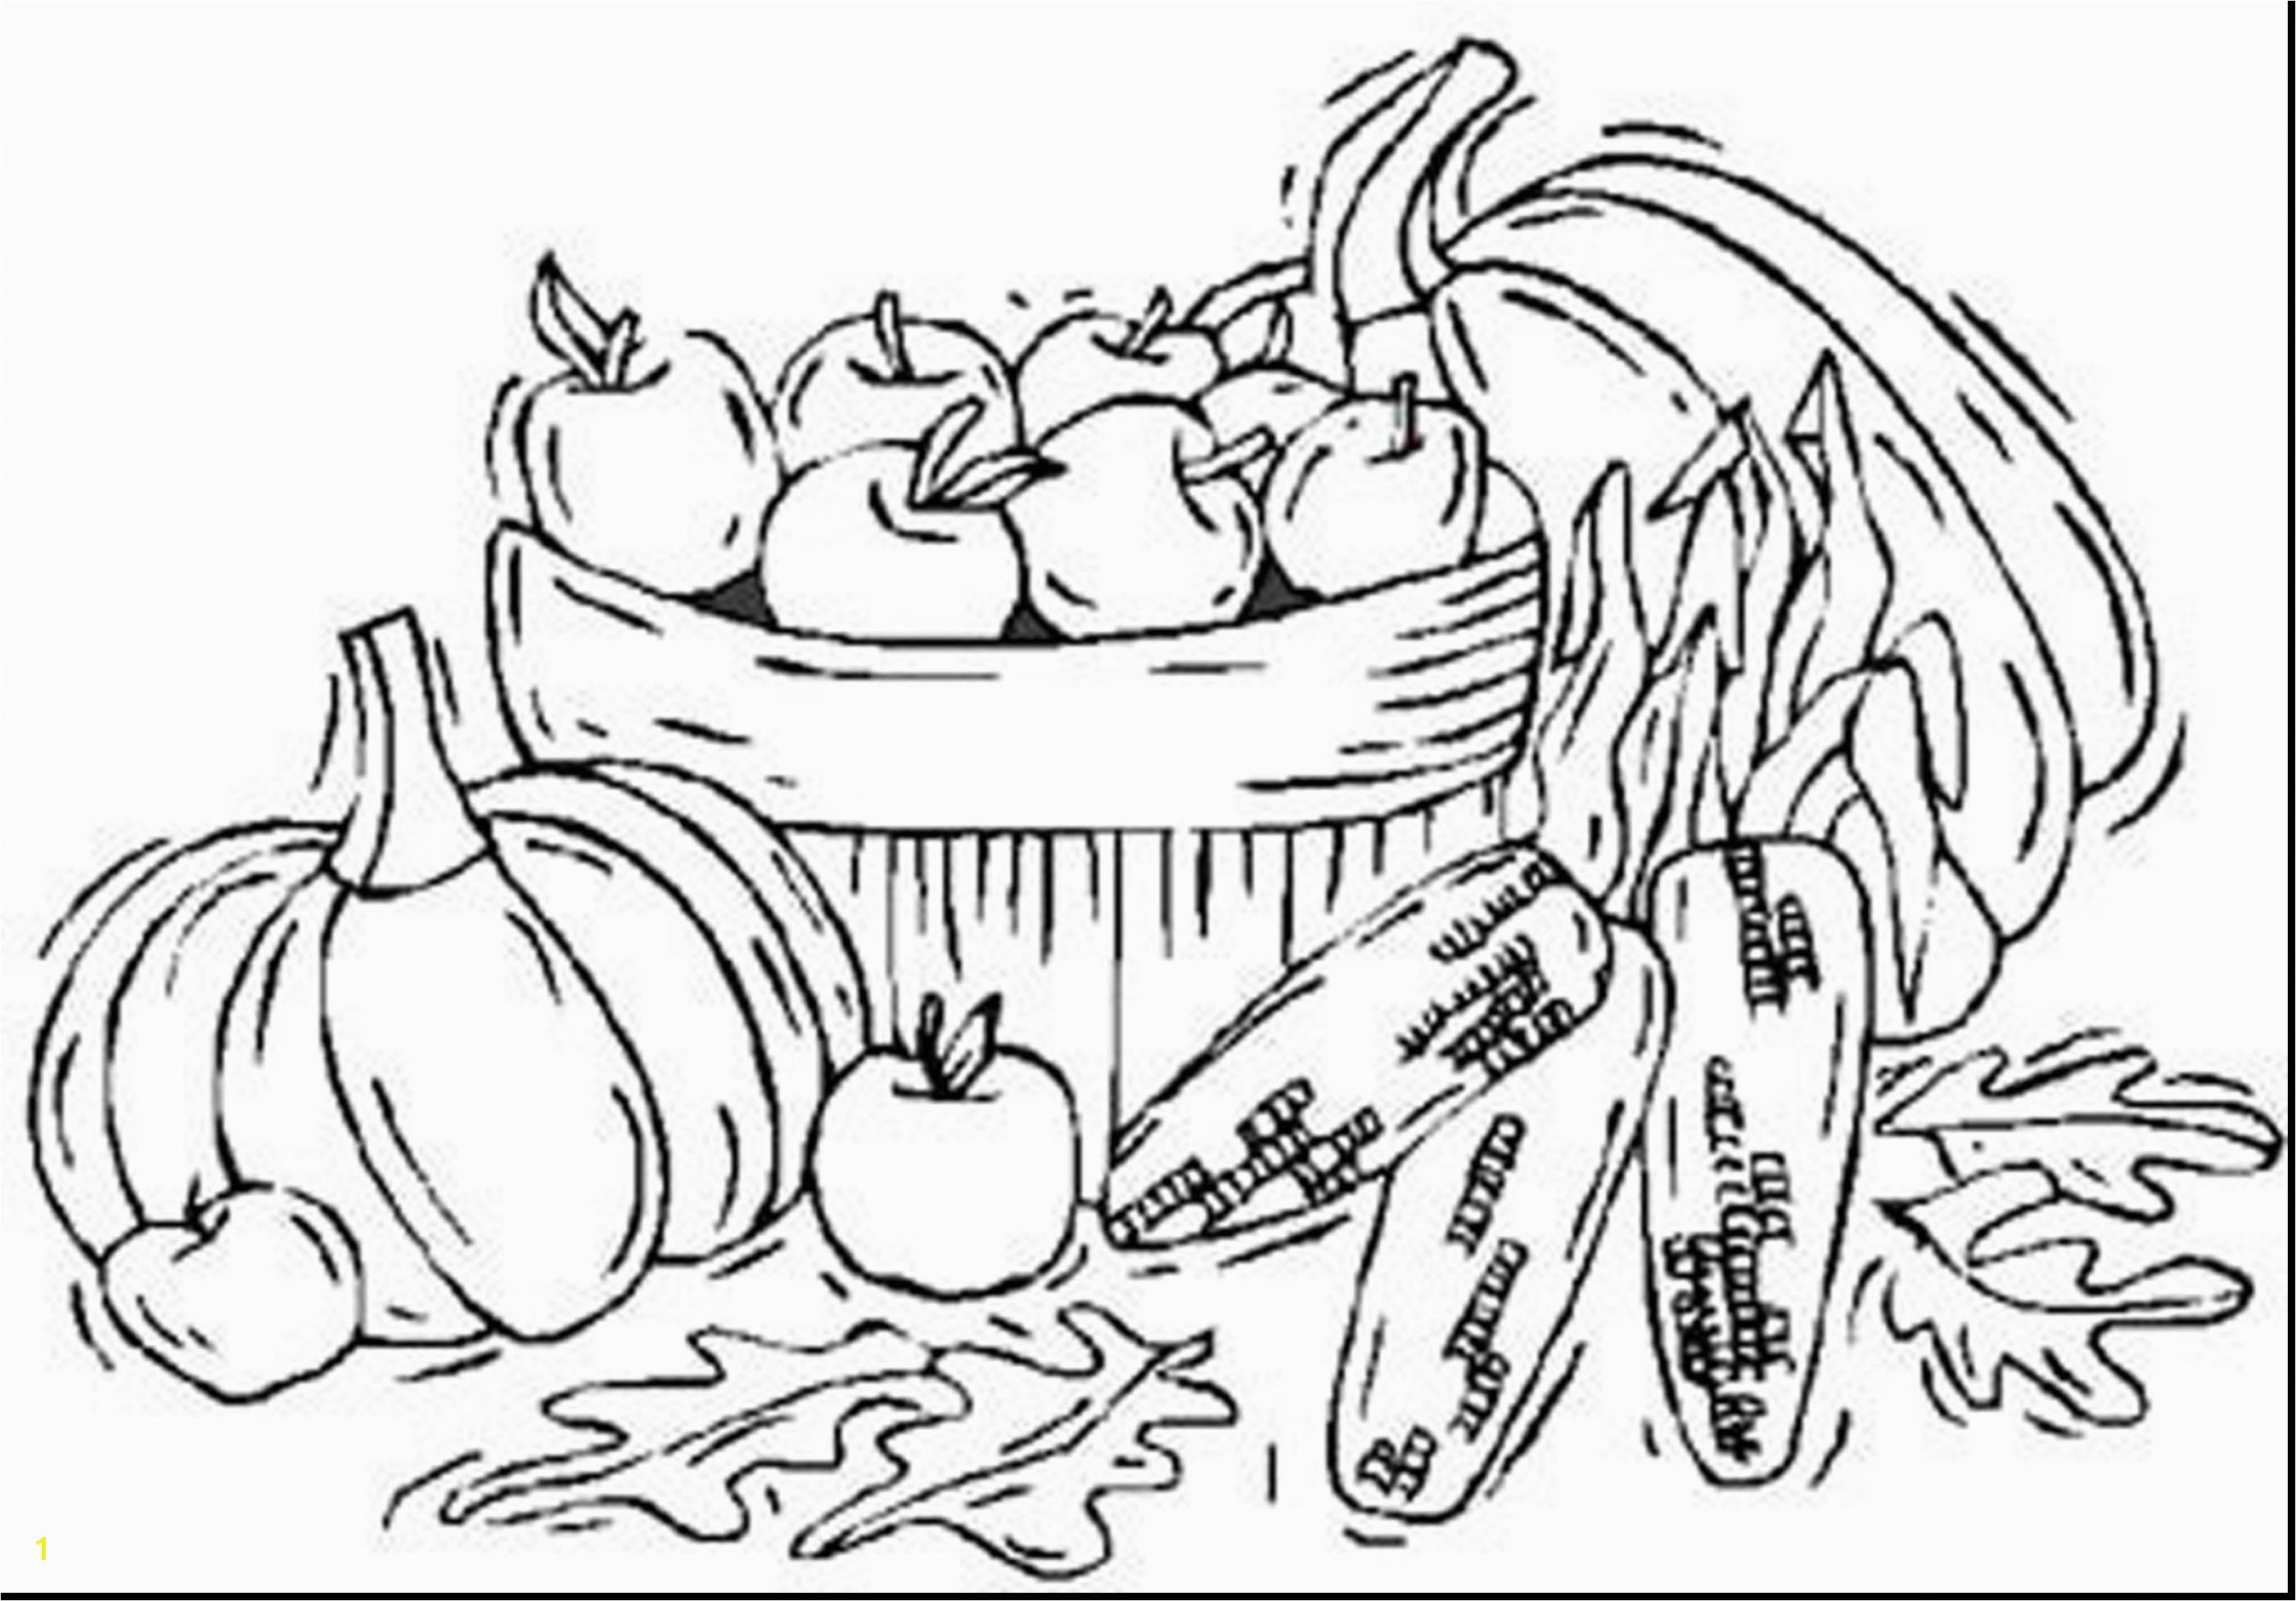 Froggy Goes to School Coloring Pages 15 Awesome Froggy Goes to School Coloring Pages Graph